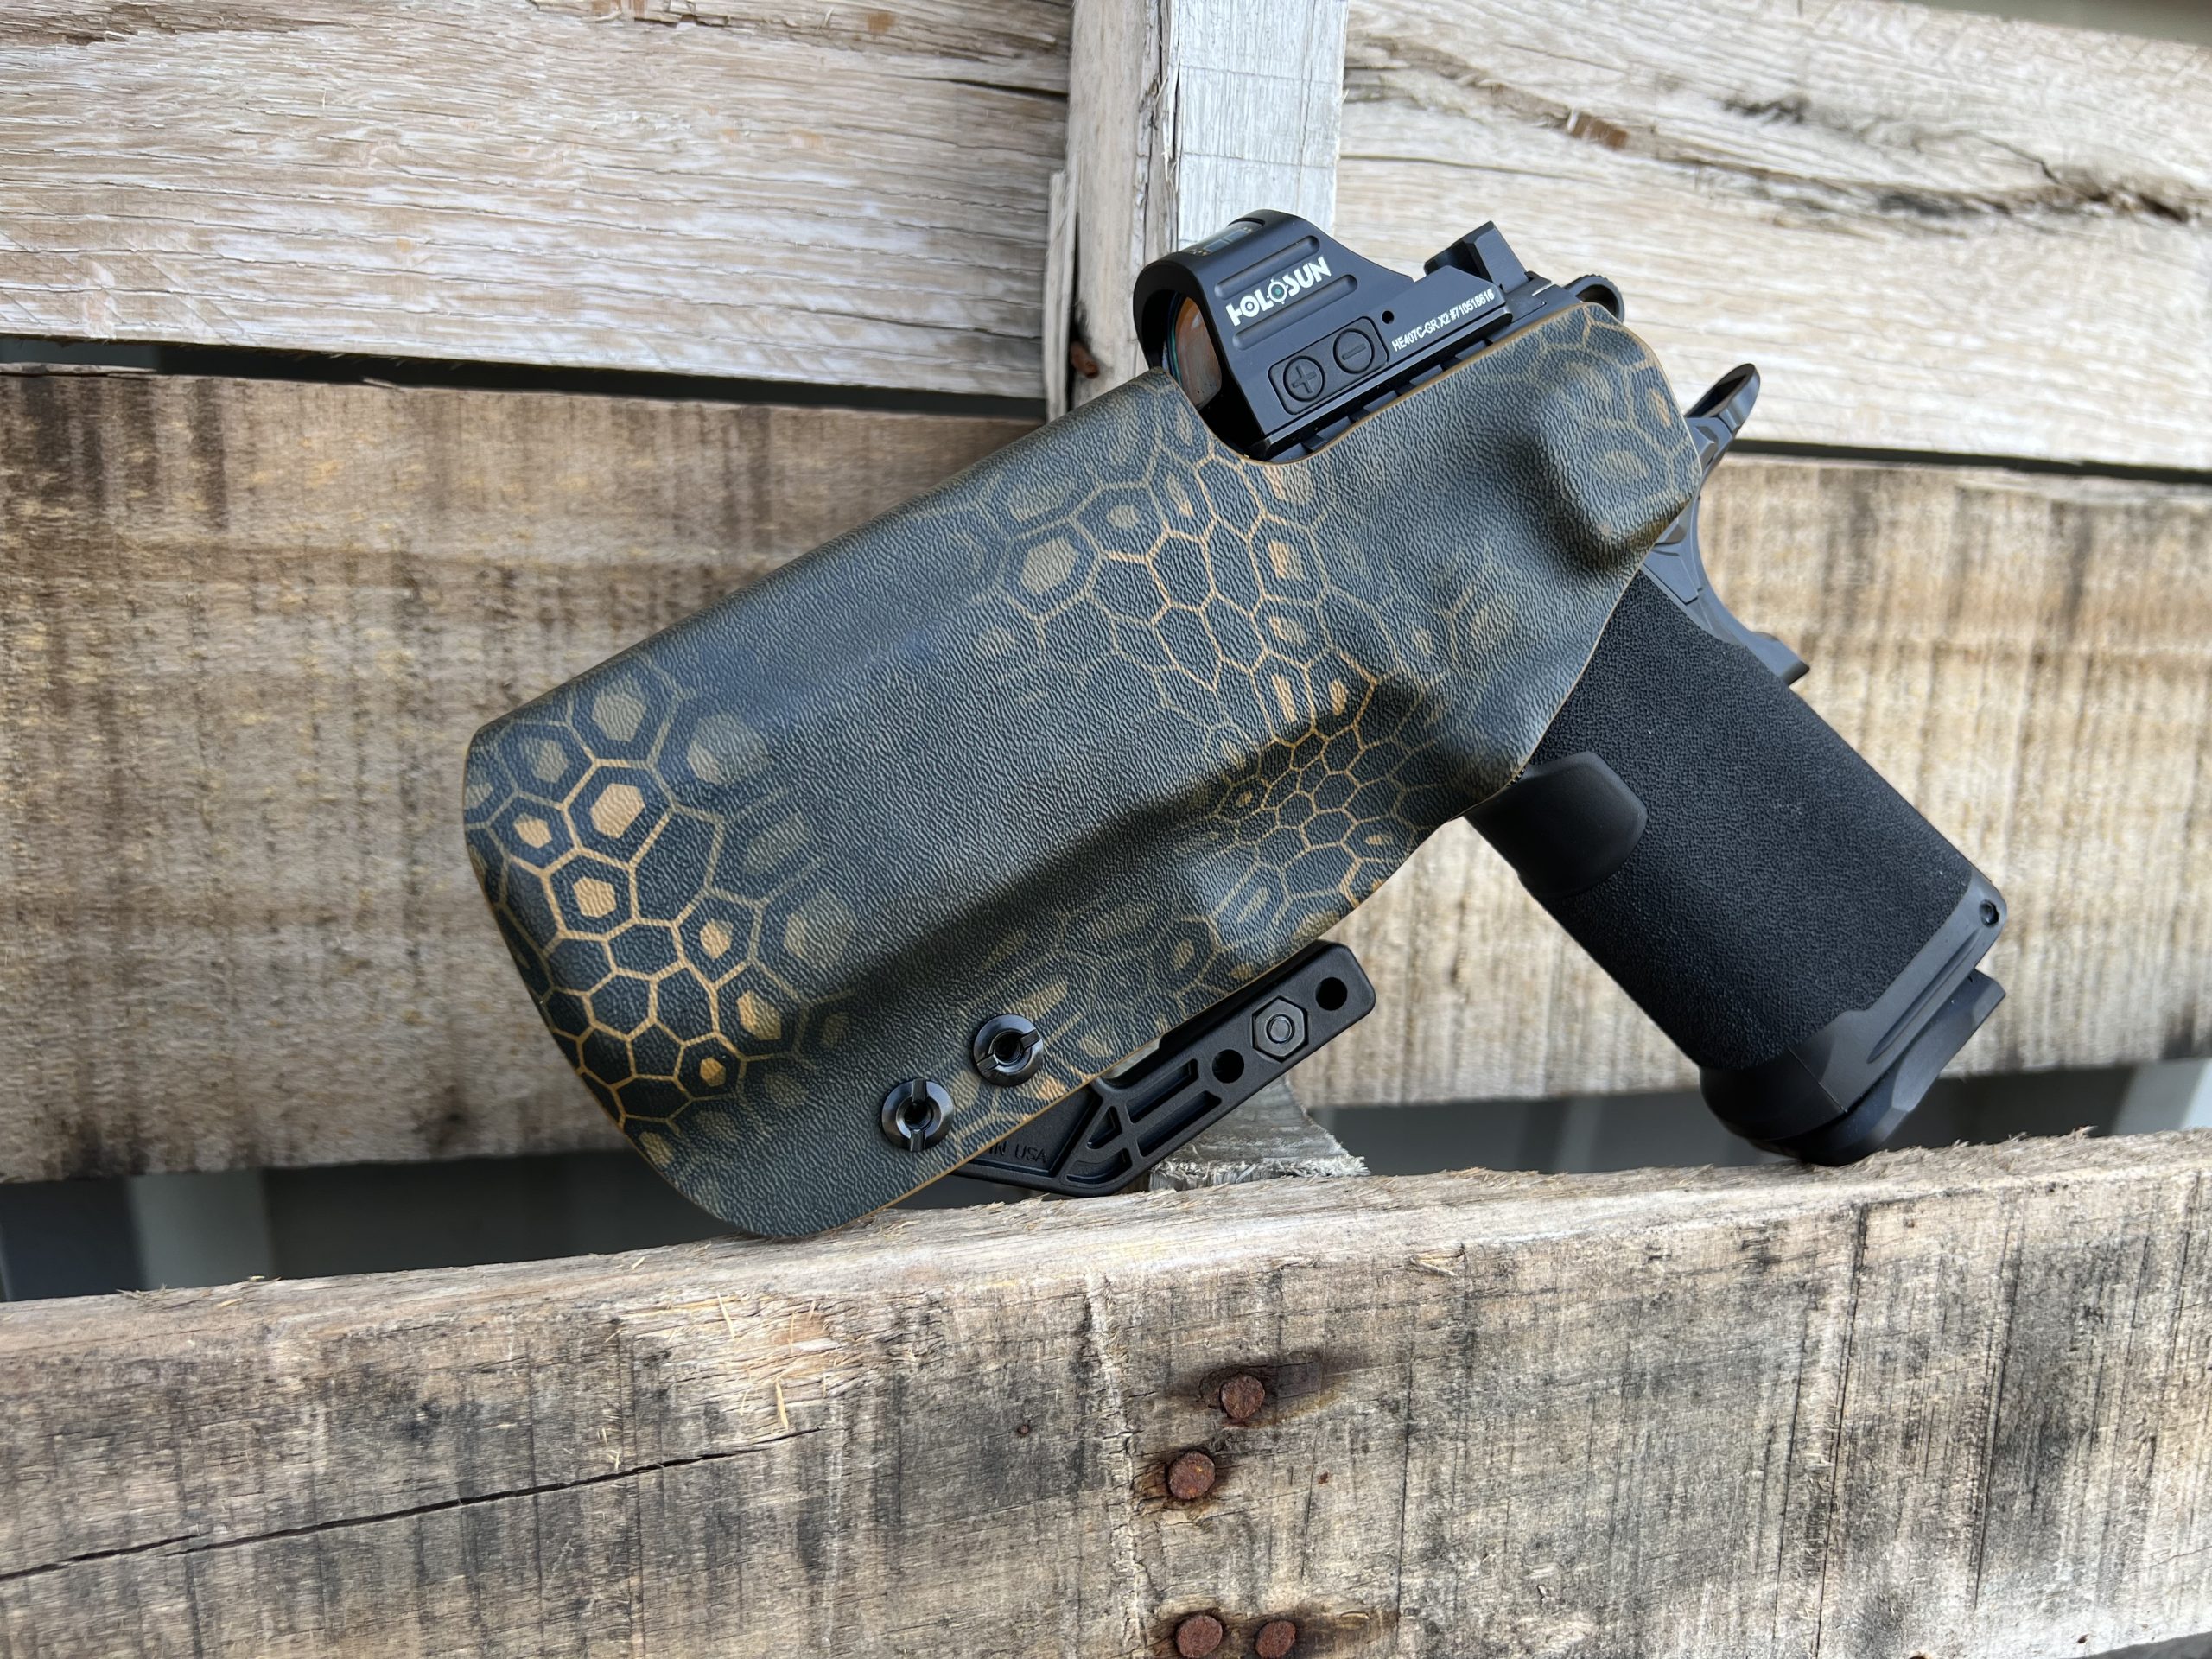 Tactical gun holster for Springfield 1911 With 5 Barrel